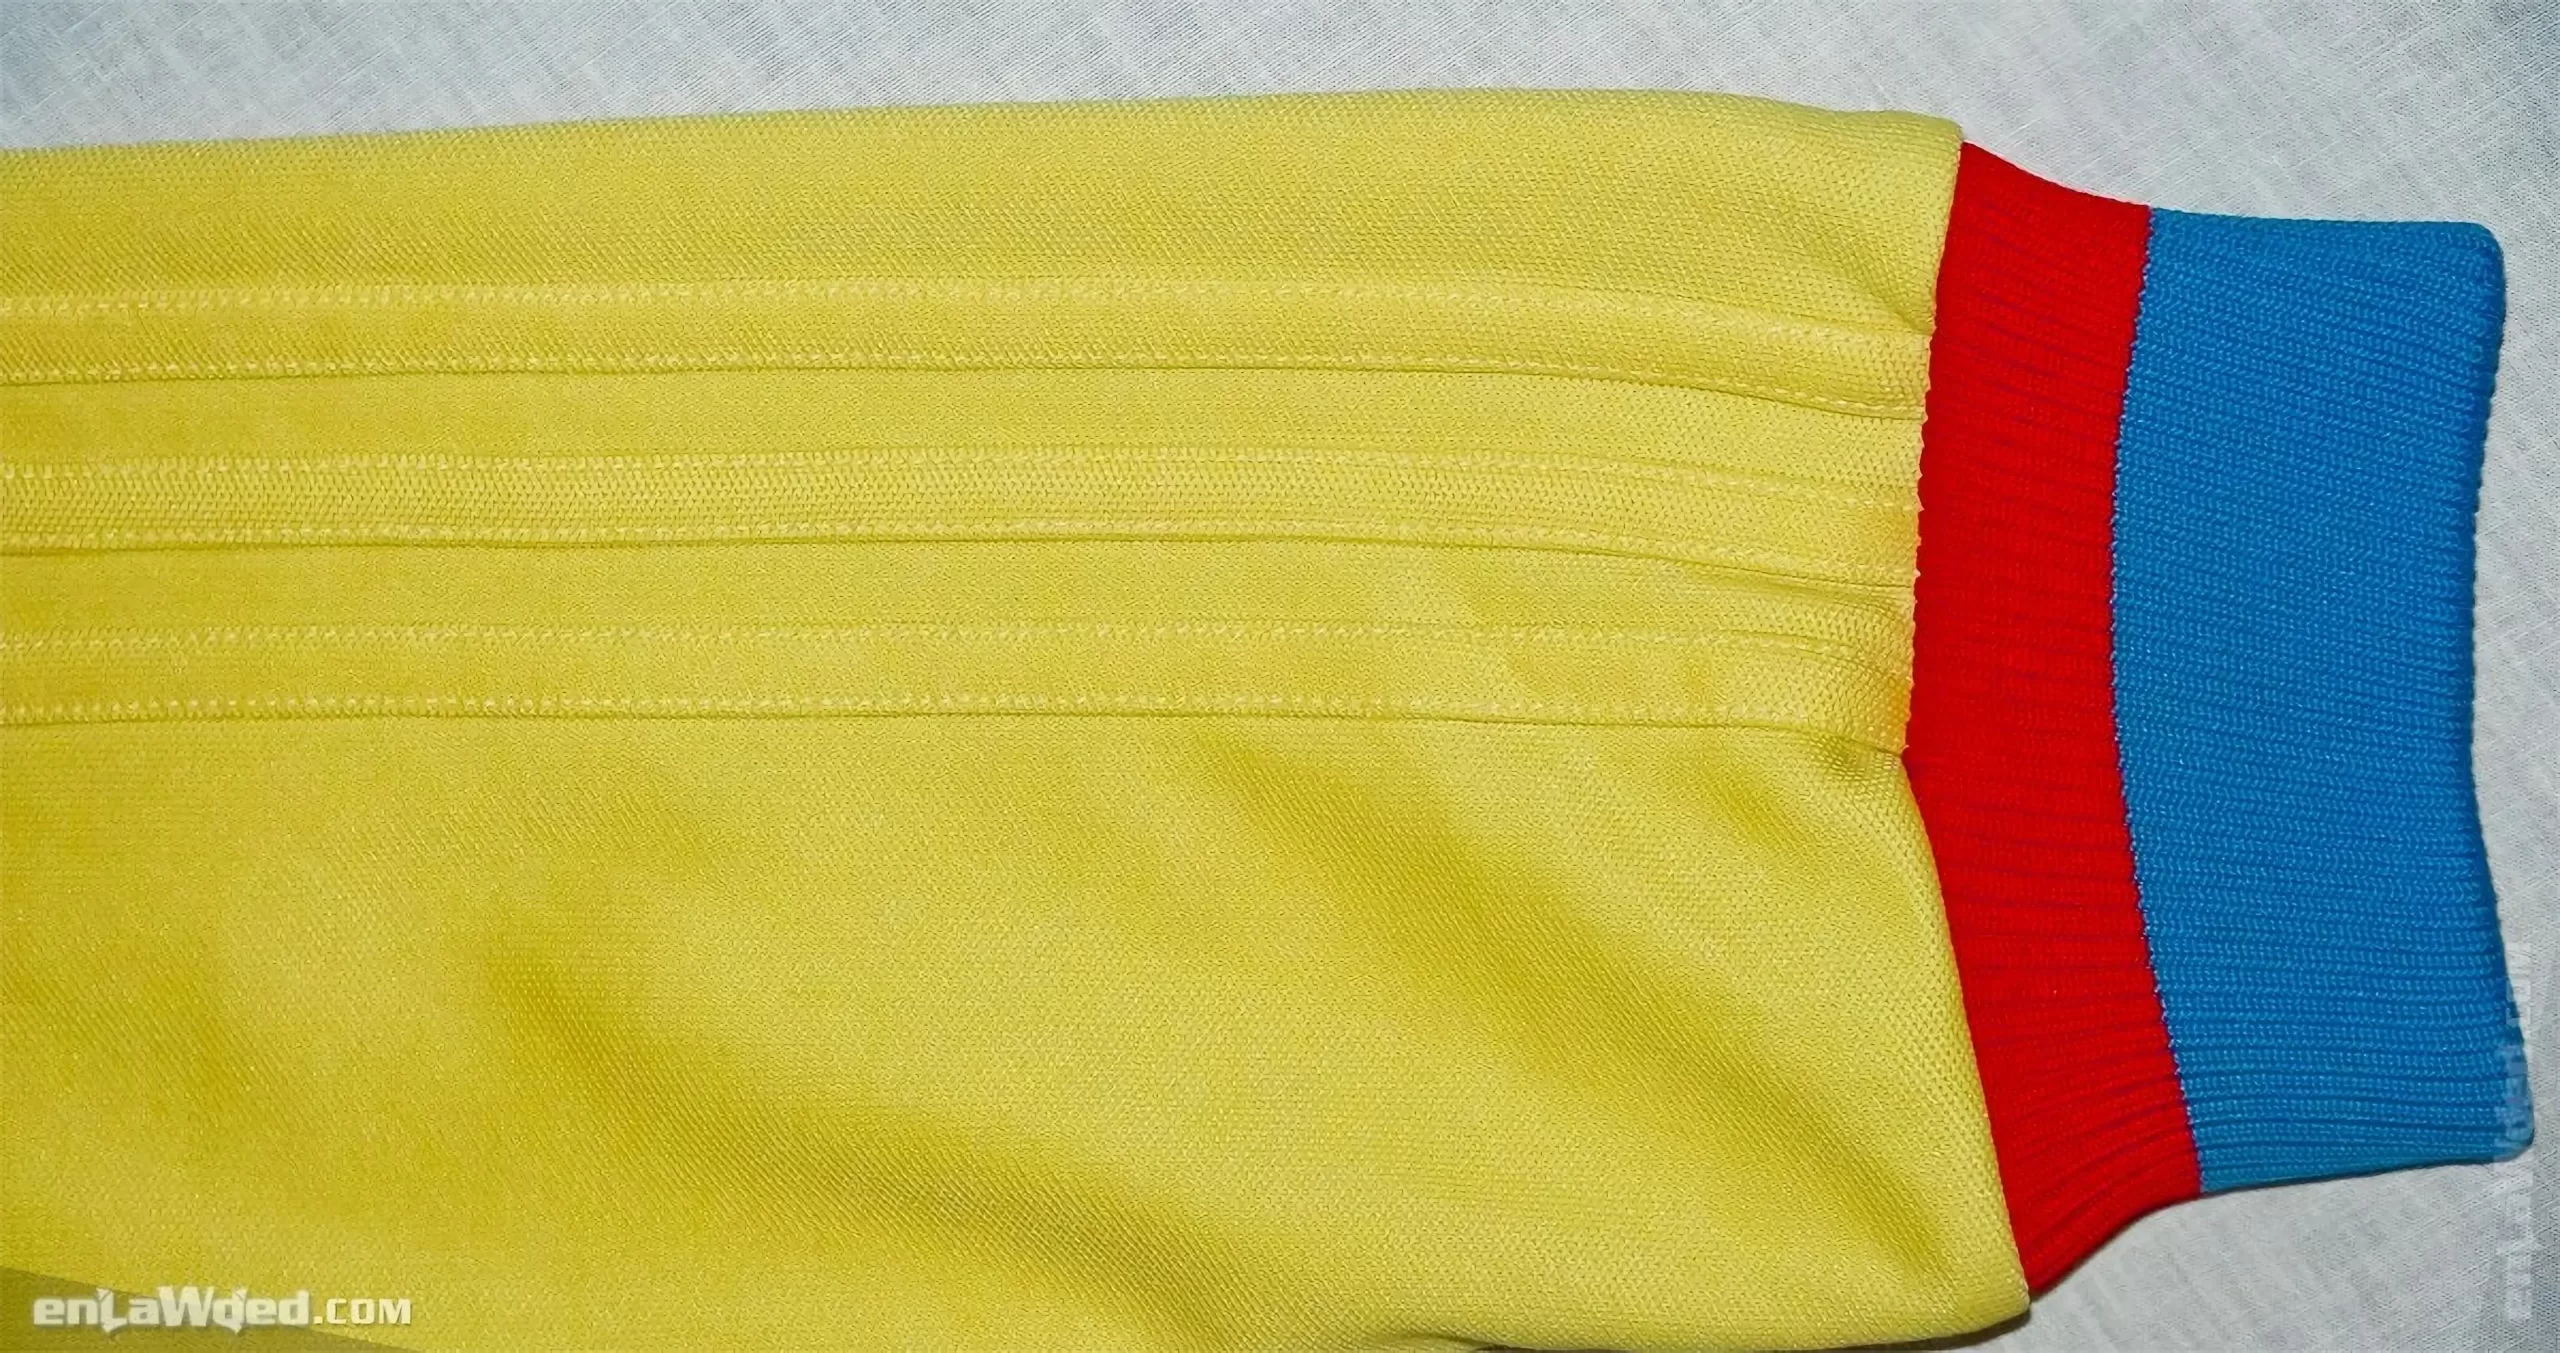 7th interior view of the Adidas Originals Colombia Track Top